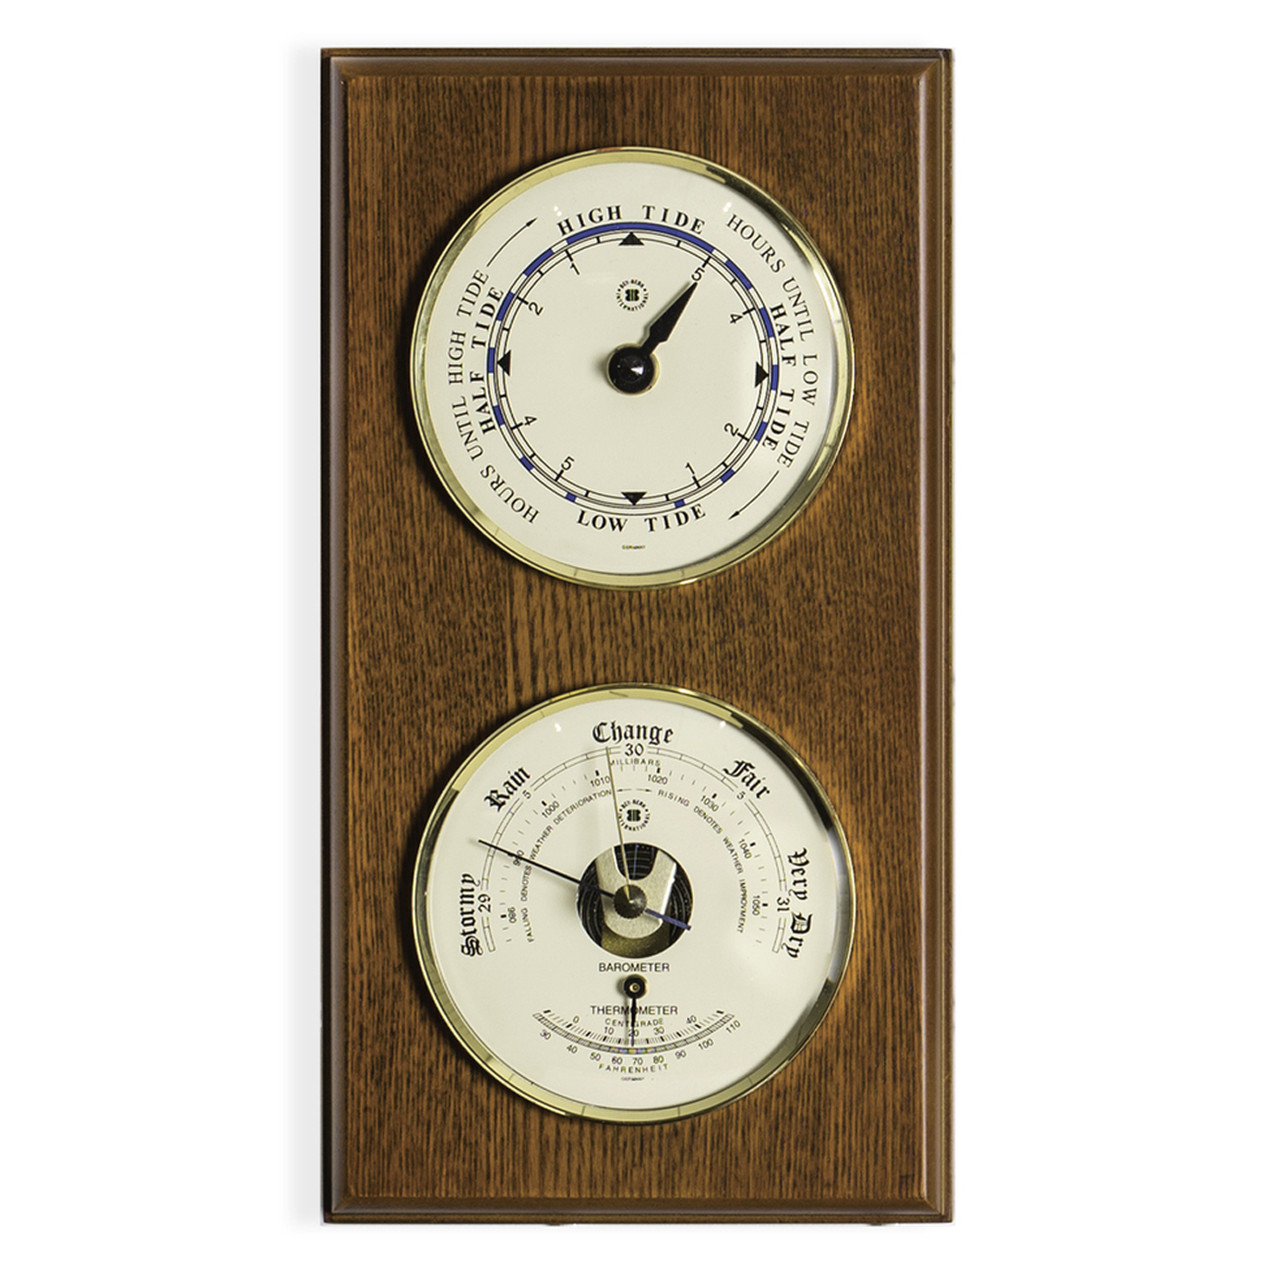 WEATHER STATIONS TIDE CLOCK AND BAROMETER & THERMOMETER "TIDEWATER" CLOCK 